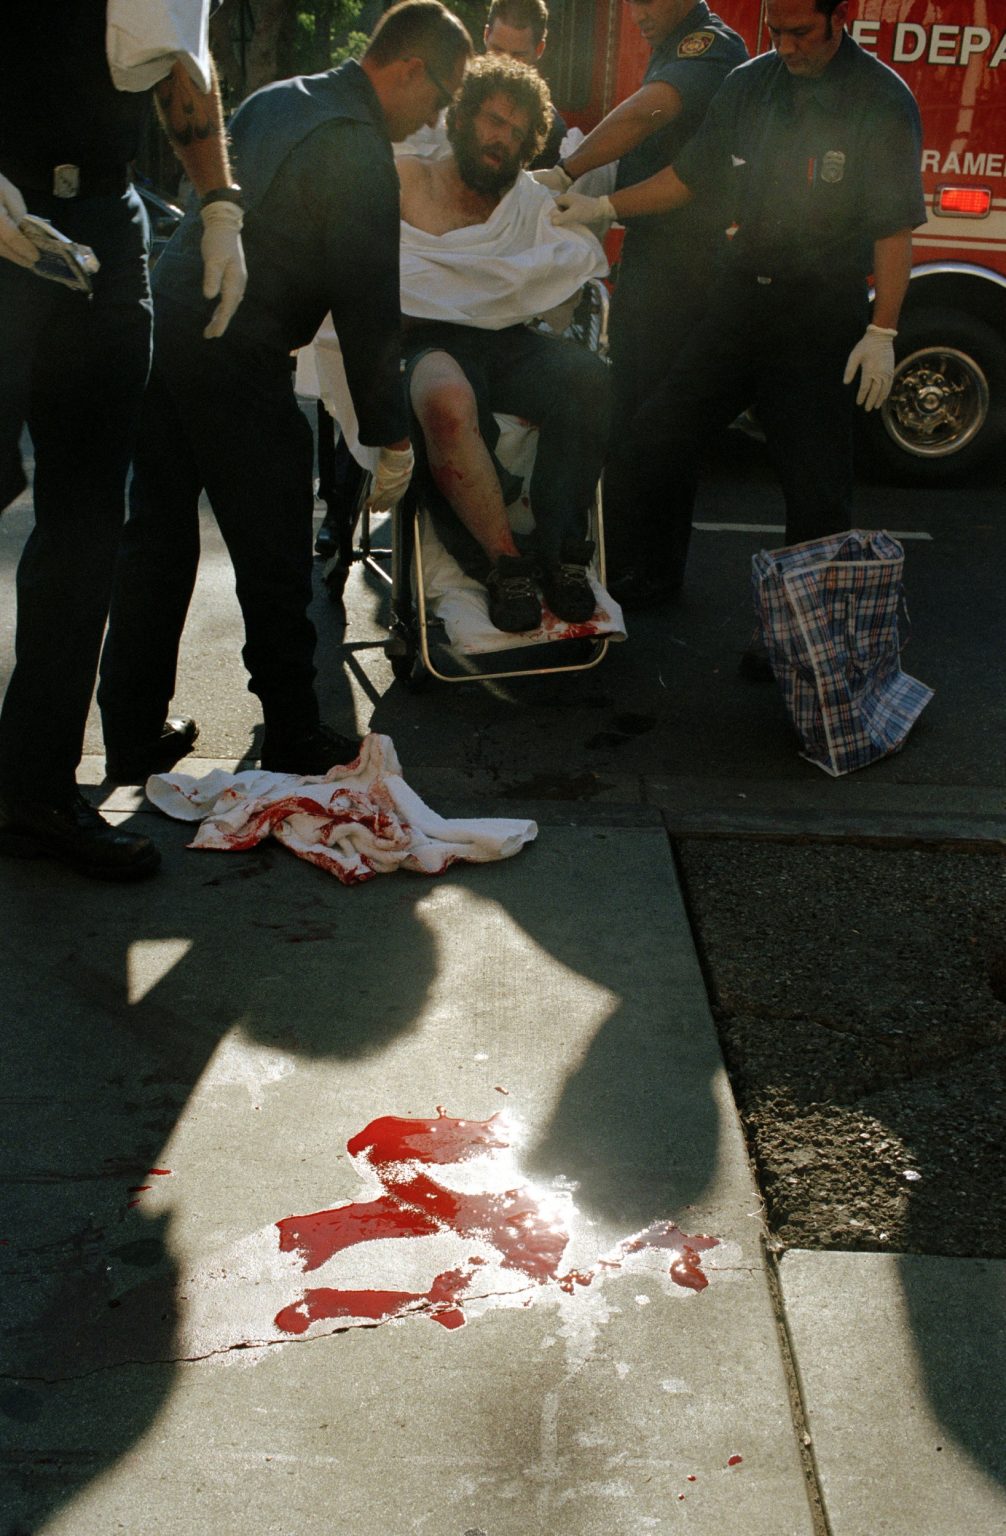 Los Angeles 2004 - Skid Row  - Man stabbed on the street, 5th street
><
Los Angeles 2004 - Skid Row - 5th street - Uomo accoltellato in strada *** Local Caption *** 00216519